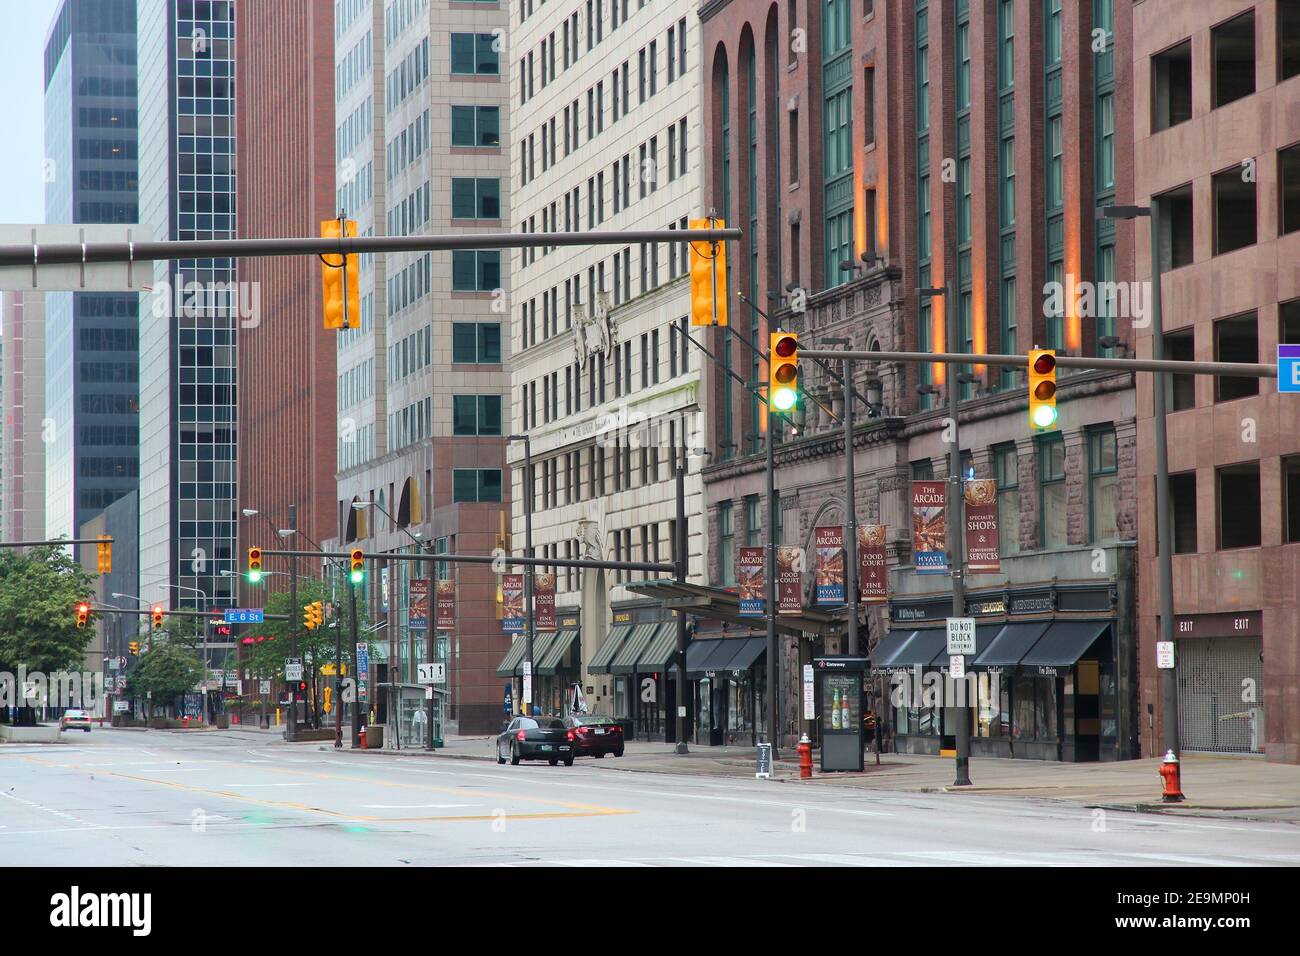 CLEVELAND, USA - JUNE 29, 2013: View along famous Euclid Avenue in Cleveland. Cleveland is the 2nd largest urban area in Ohio with more than 2 million Stock Photo